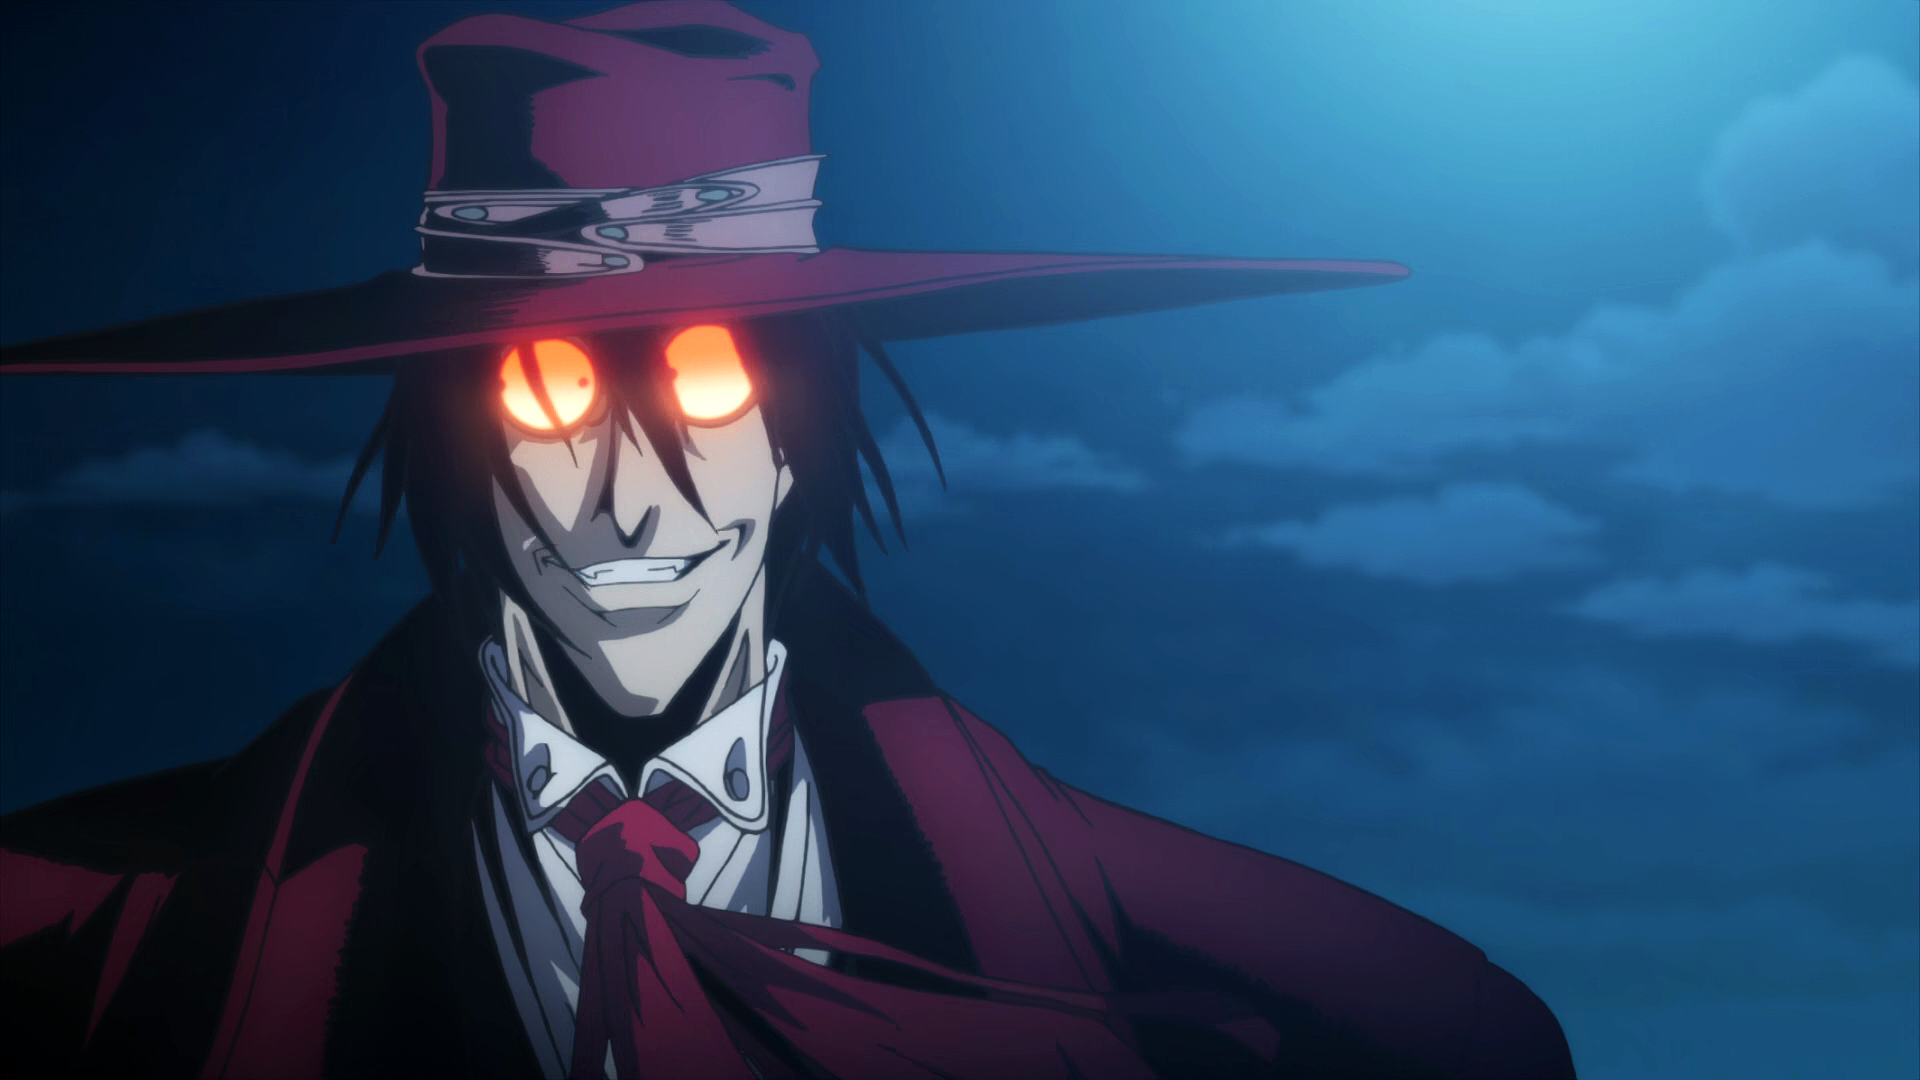 Alucard is the vampire protagonist of the Manga and Anime series Hellsing. 